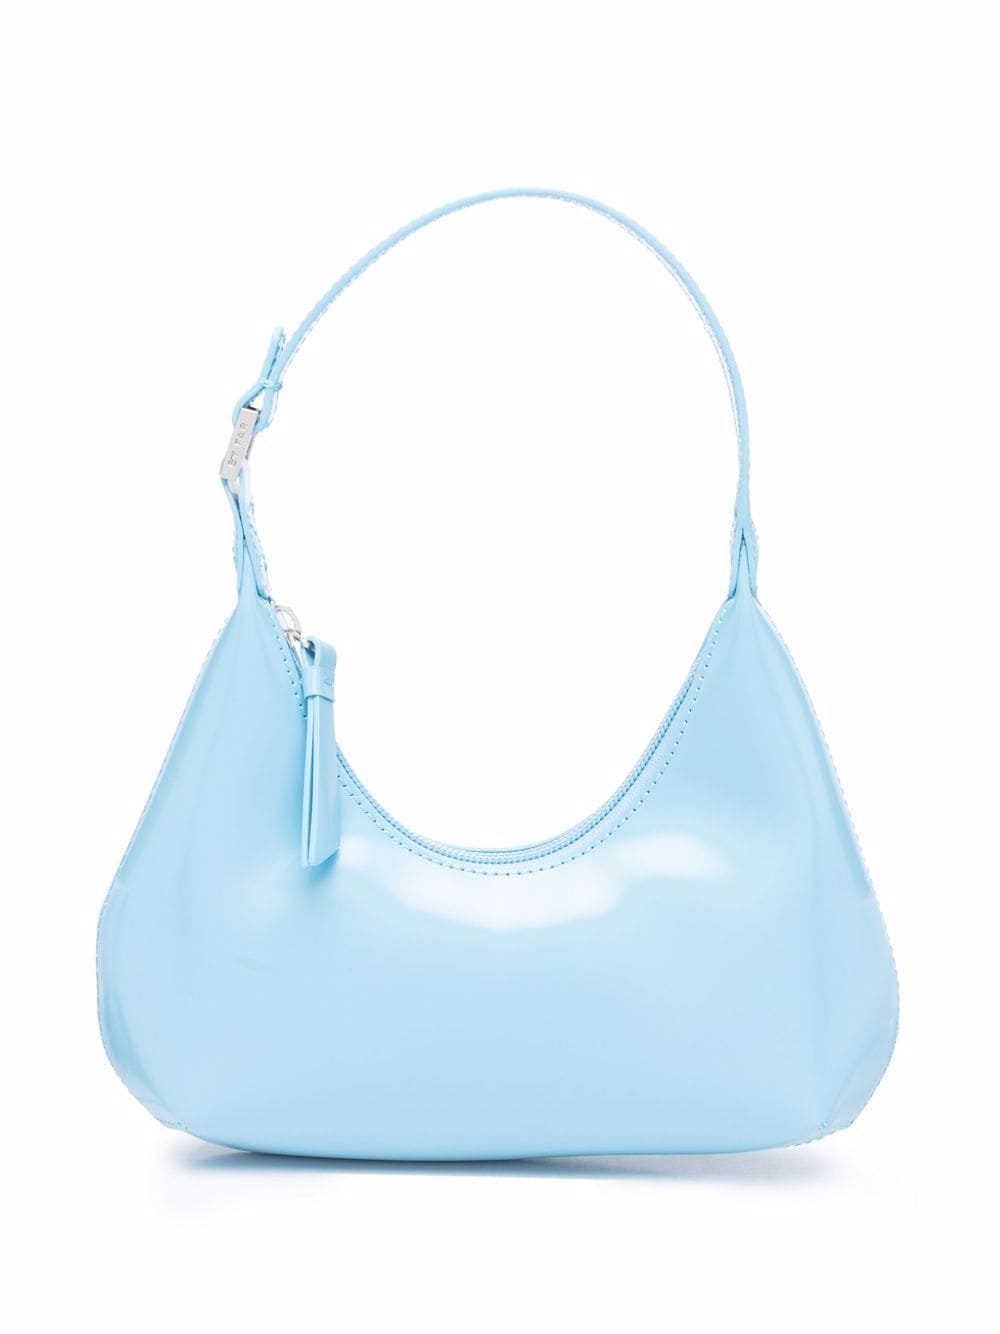 BY FAR Baby Amber semi-patent leather shoulder bag - Blue von BY FAR